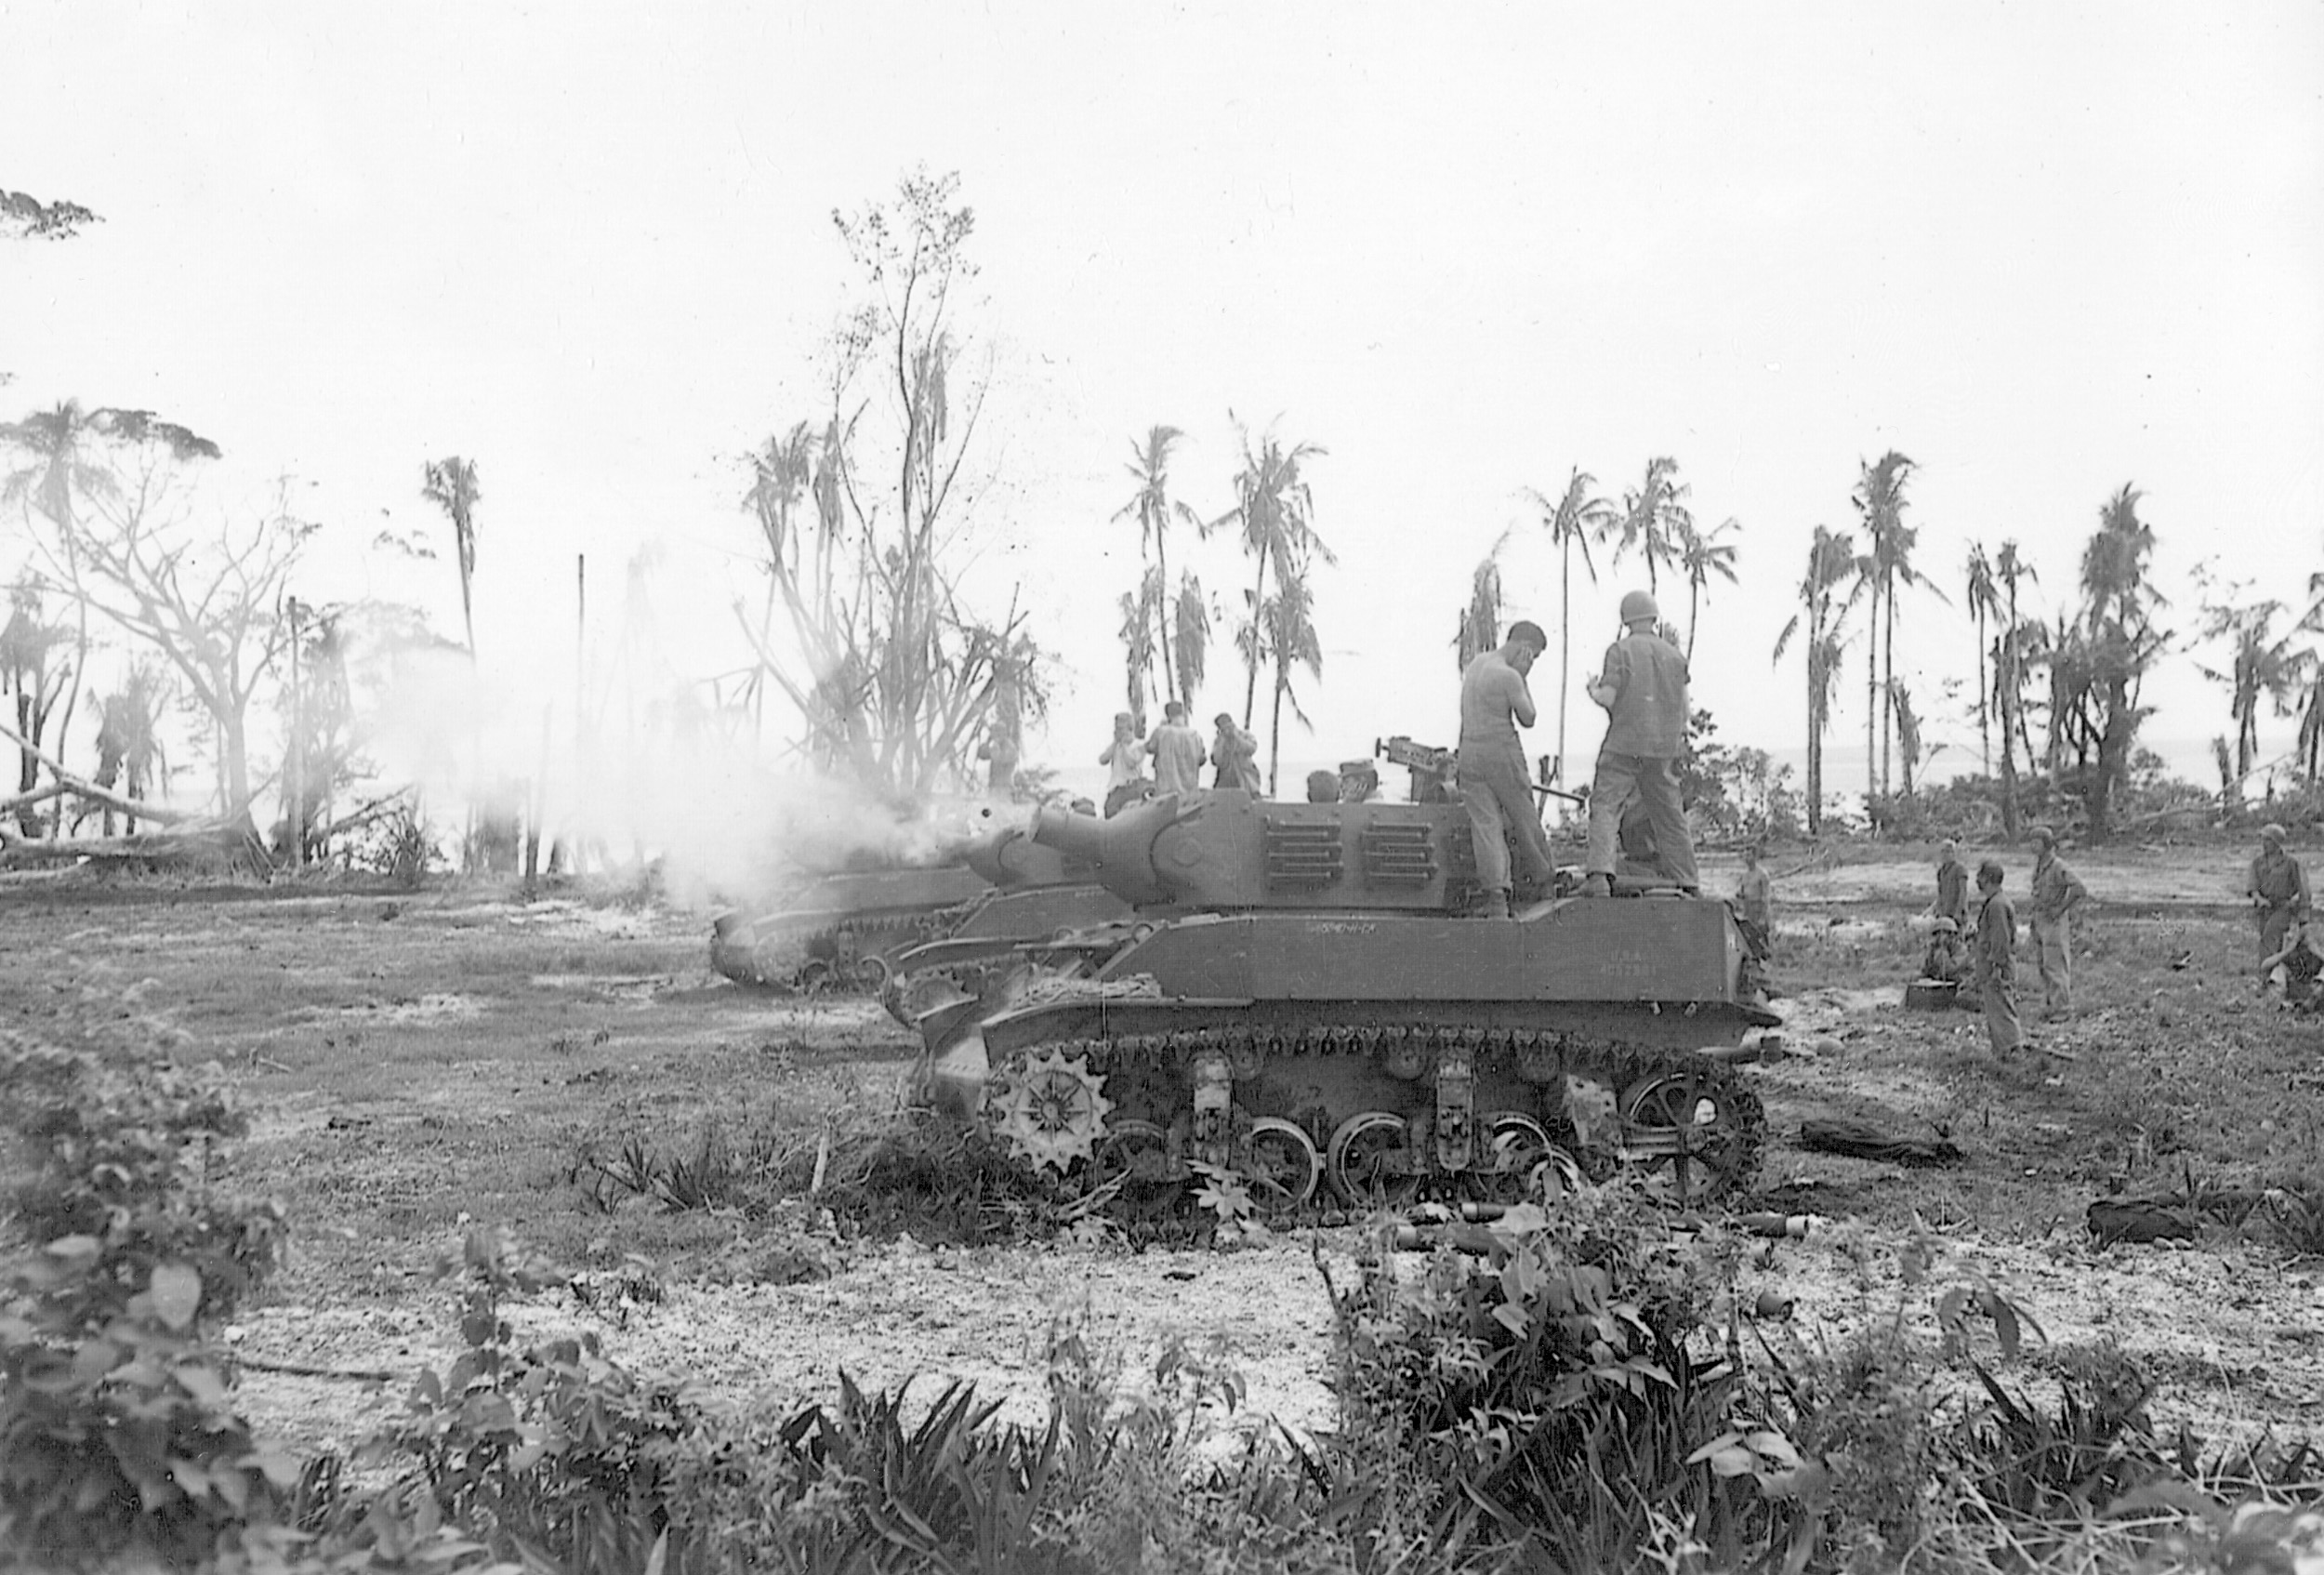 Firing a battery of self-propelled artillery, members of the 24th Infantry Division soften up enemy entrenchments on New Guinea.